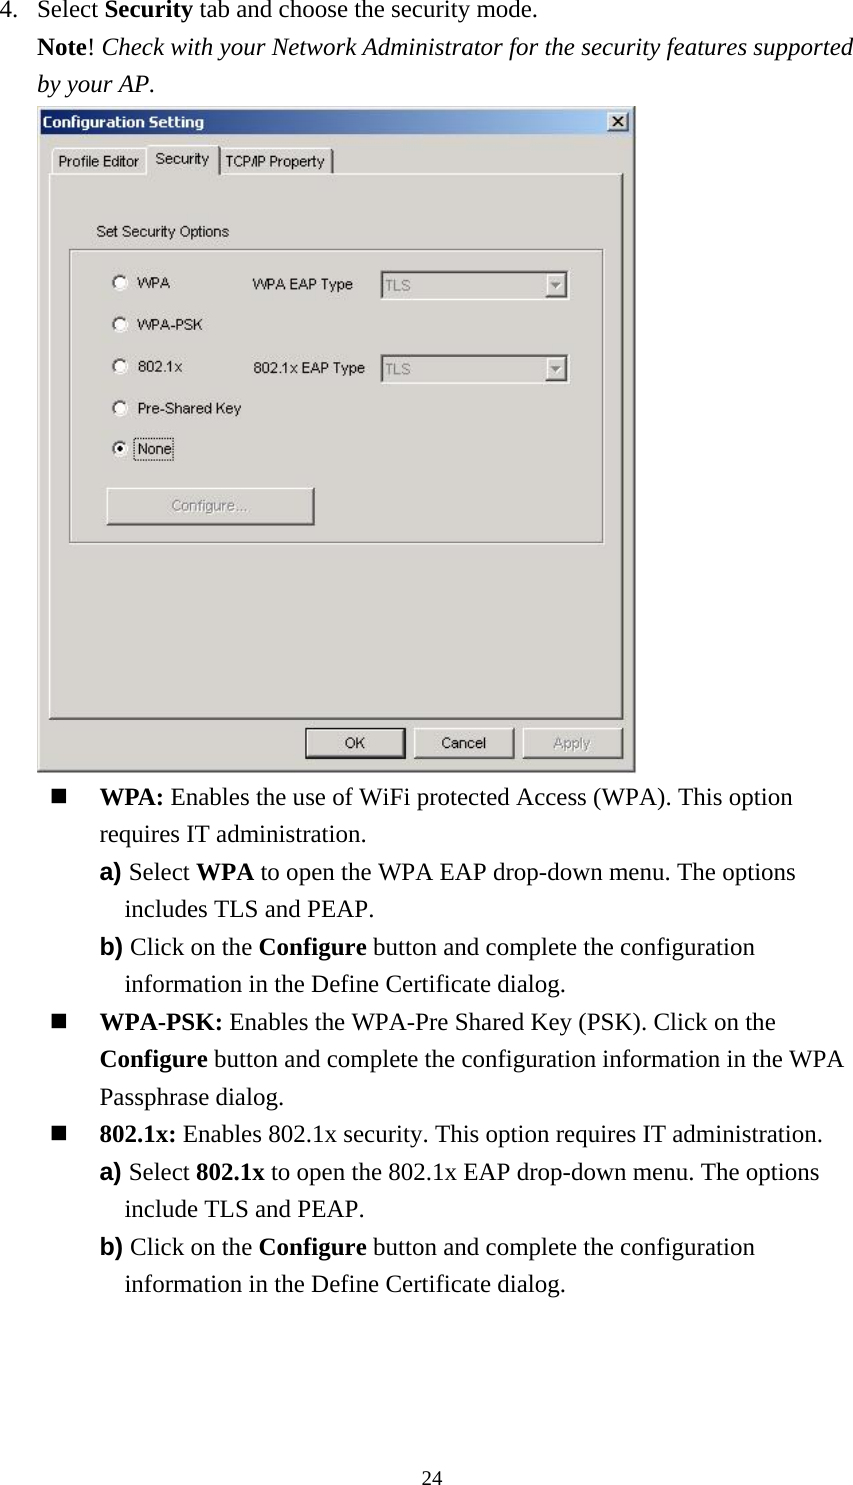  244. Select Security tab and choose the security mode. Note! Check with your Network Administrator for the security features supported by your AP.    WPA: Enables the use of WiFi protected Access (WPA). This option requires IT administration. a) Select WPA to open the WPA EAP drop-down menu. The options includes TLS and PEAP. b) Click on the Configure button and complete the configuration information in the Define Certificate dialog.   WPA-PSK: Enables the WPA-Pre Shared Key (PSK). Click on the Configure button and complete the configuration information in the WPA Passphrase dialog.   802.1x: Enables 802.1x security. This option requires IT administration. a) Select 802.1x to open the 802.1x EAP drop-down menu. The options include TLS and PEAP. b) Click on the Configure button and complete the configuration information in the Define Certificate dialog. 